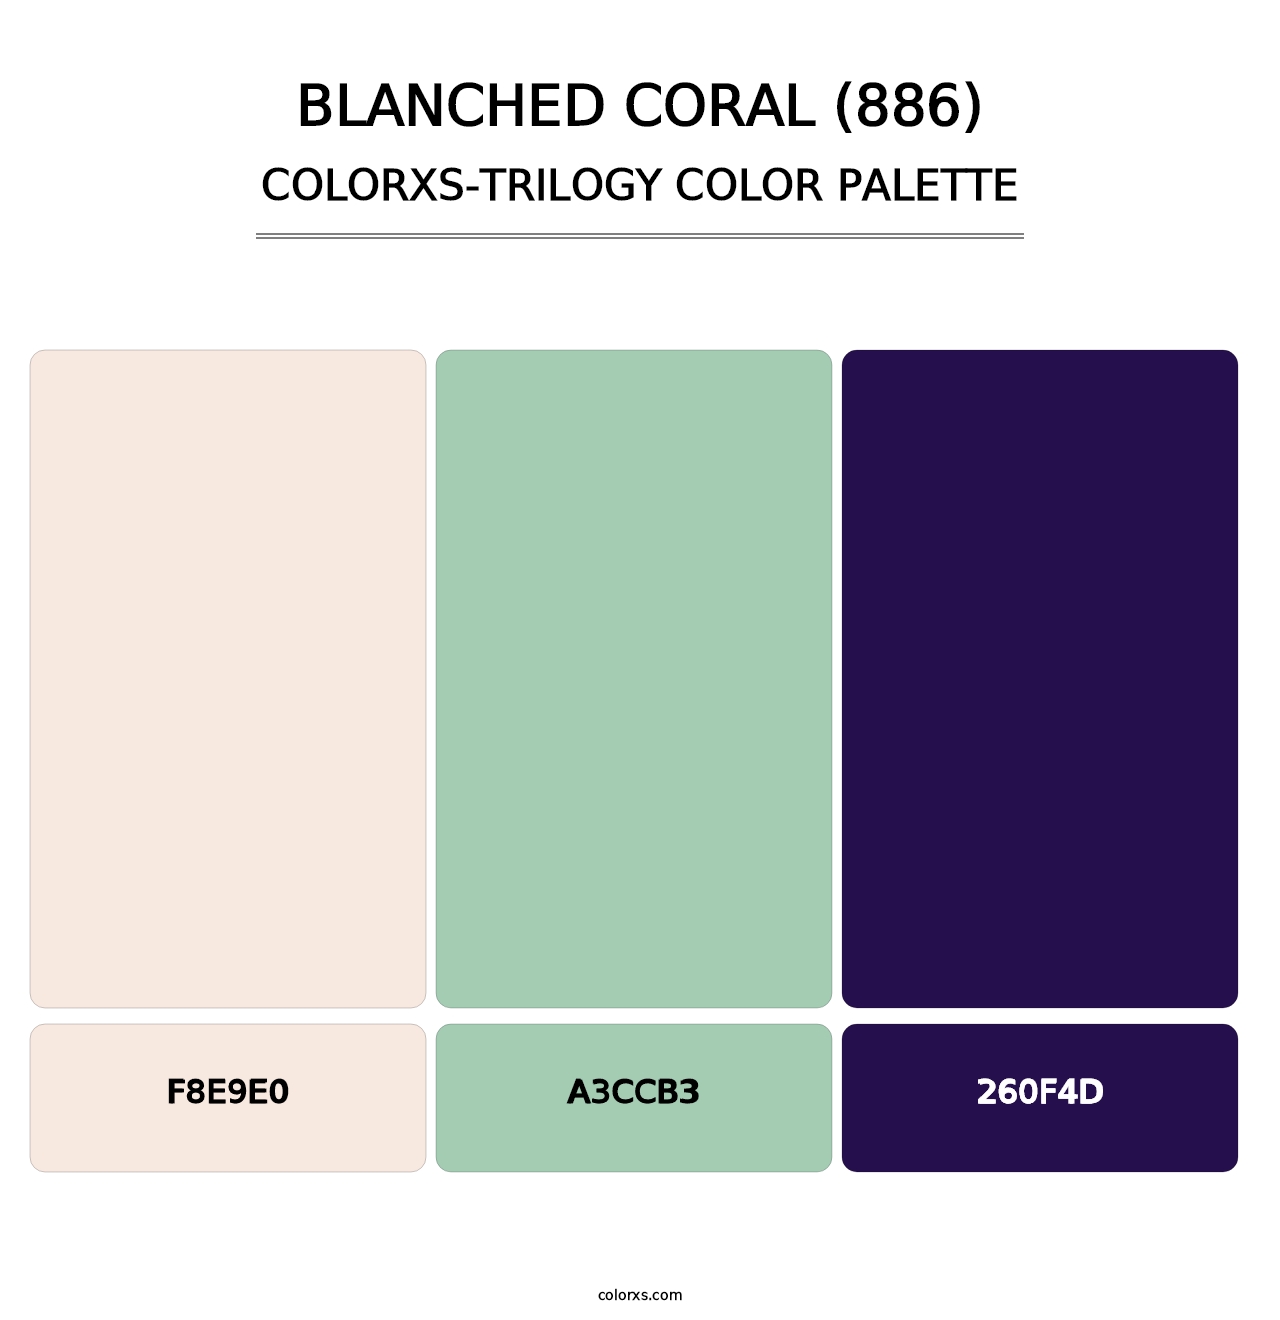 Blanched Coral (886) - Colorxs Trilogy Palette